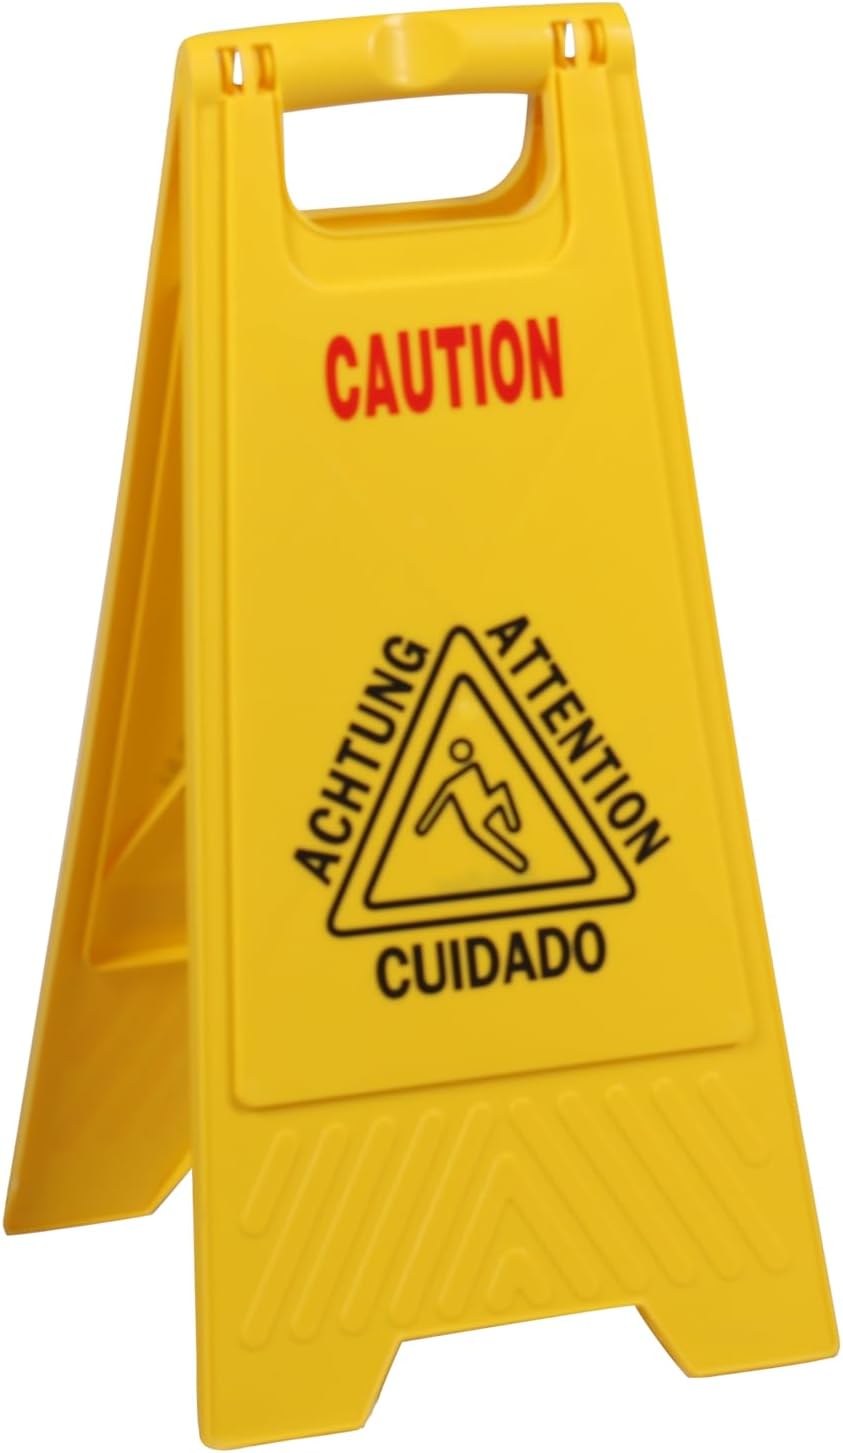 Caution "Wet Floor" Sign, Bright Yellow Heavy-Duty, Slippery When Wet A-Frame Sign